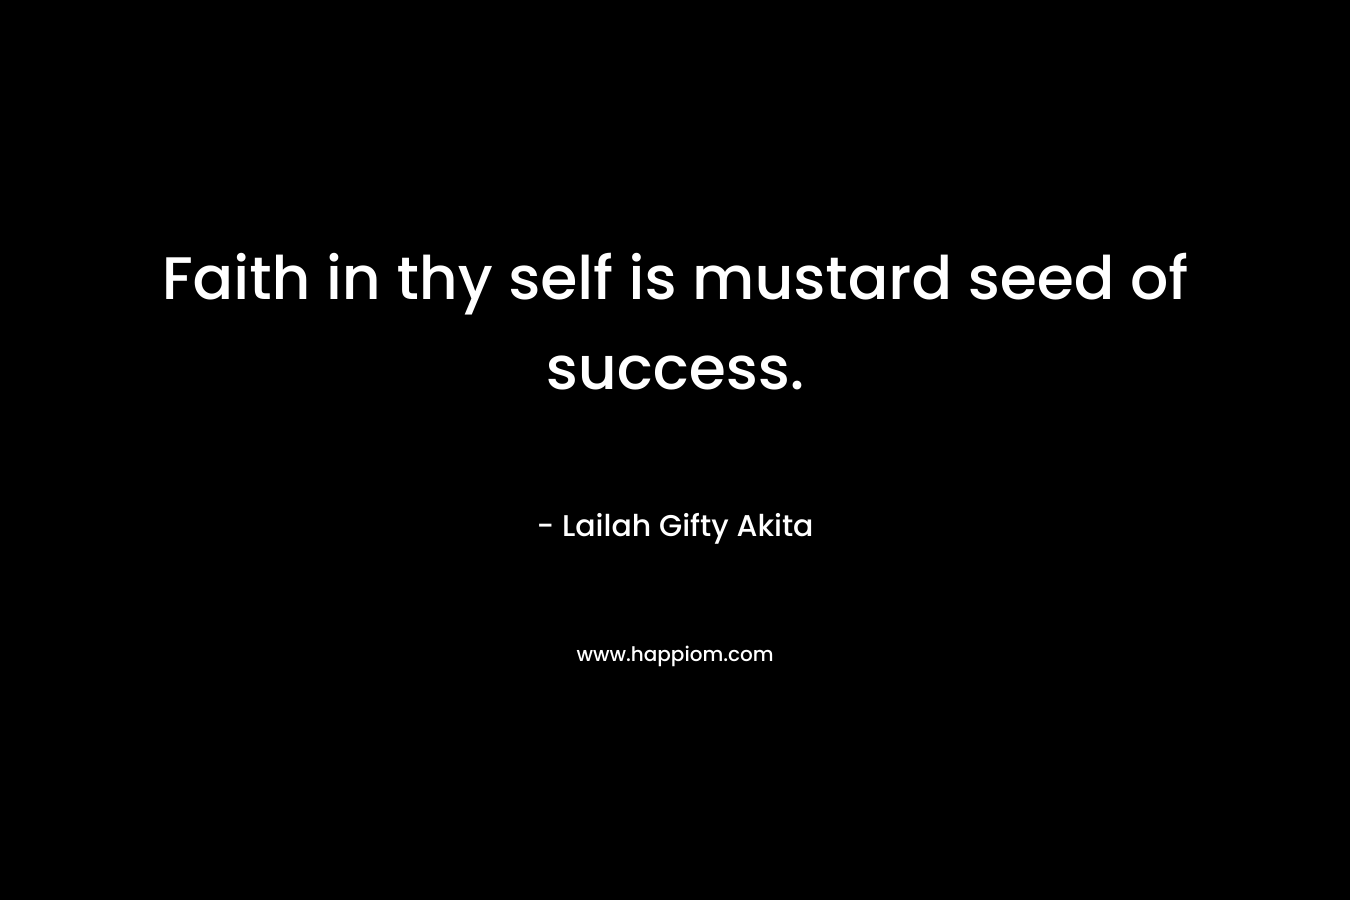 Faith in thy self is mustard seed of success. – Lailah Gifty Akita